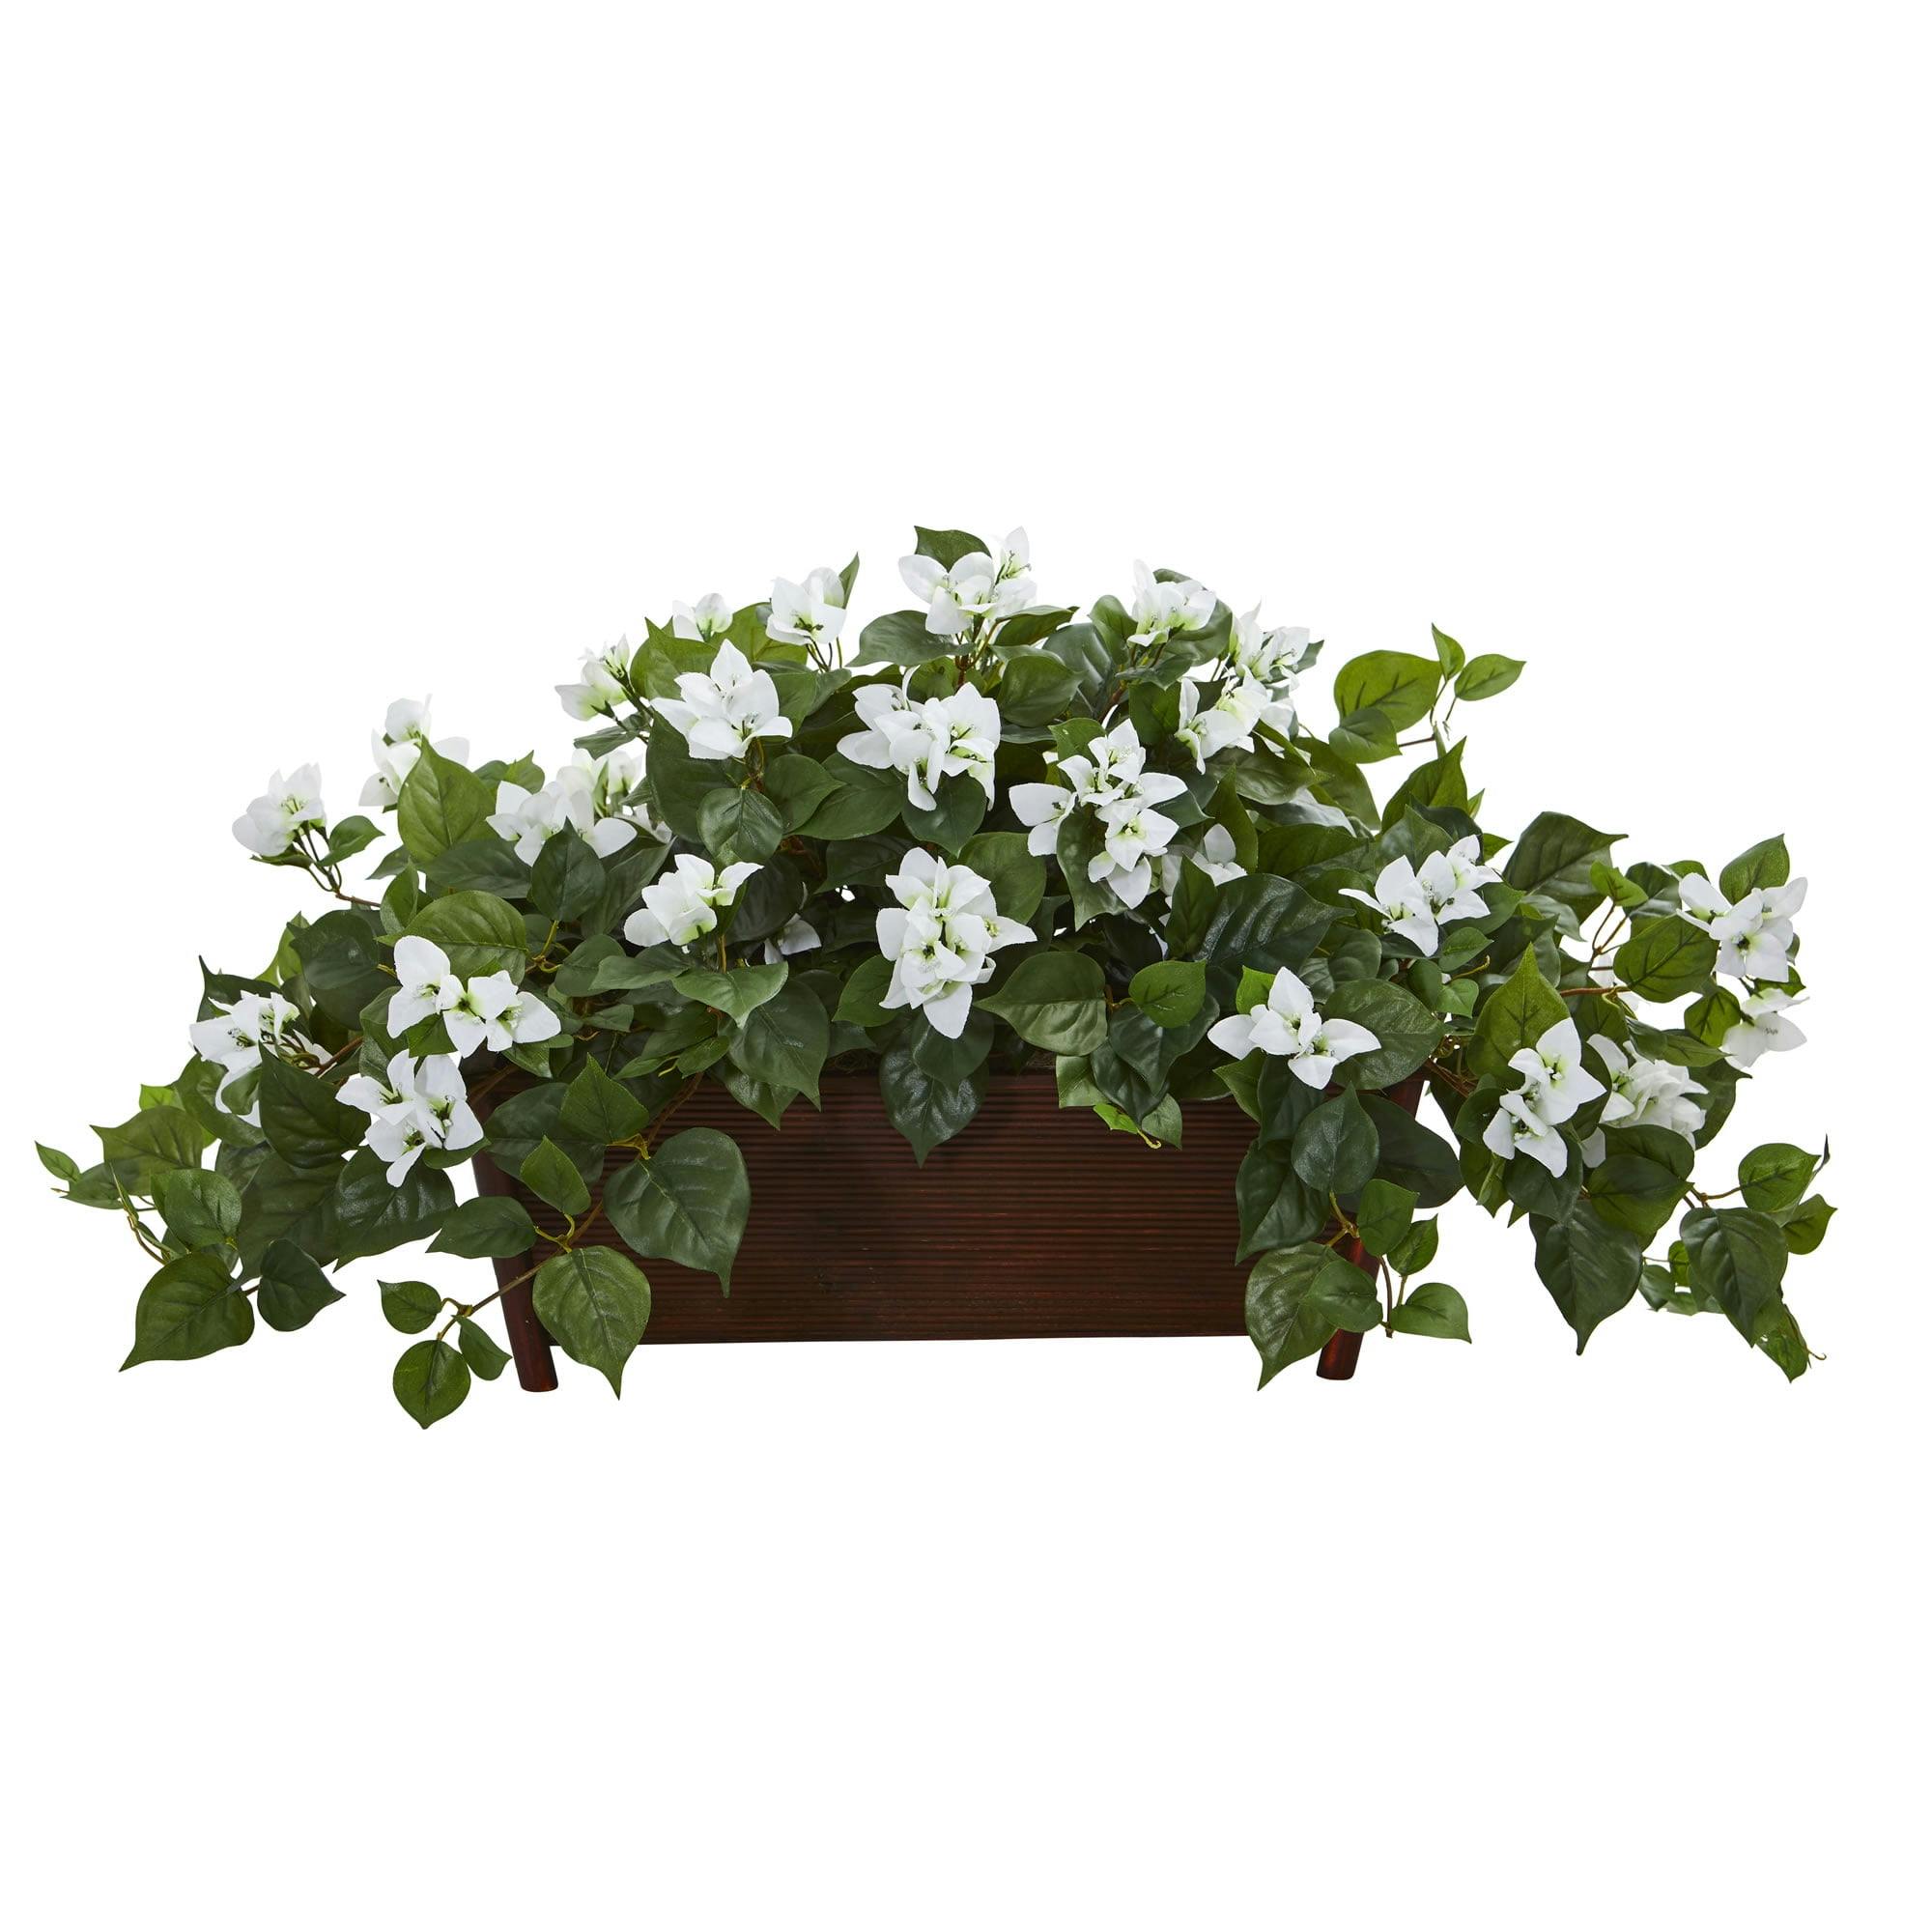 Summer Vibrance 32" Outdoor Potted Bougainvillea Arrangement in White